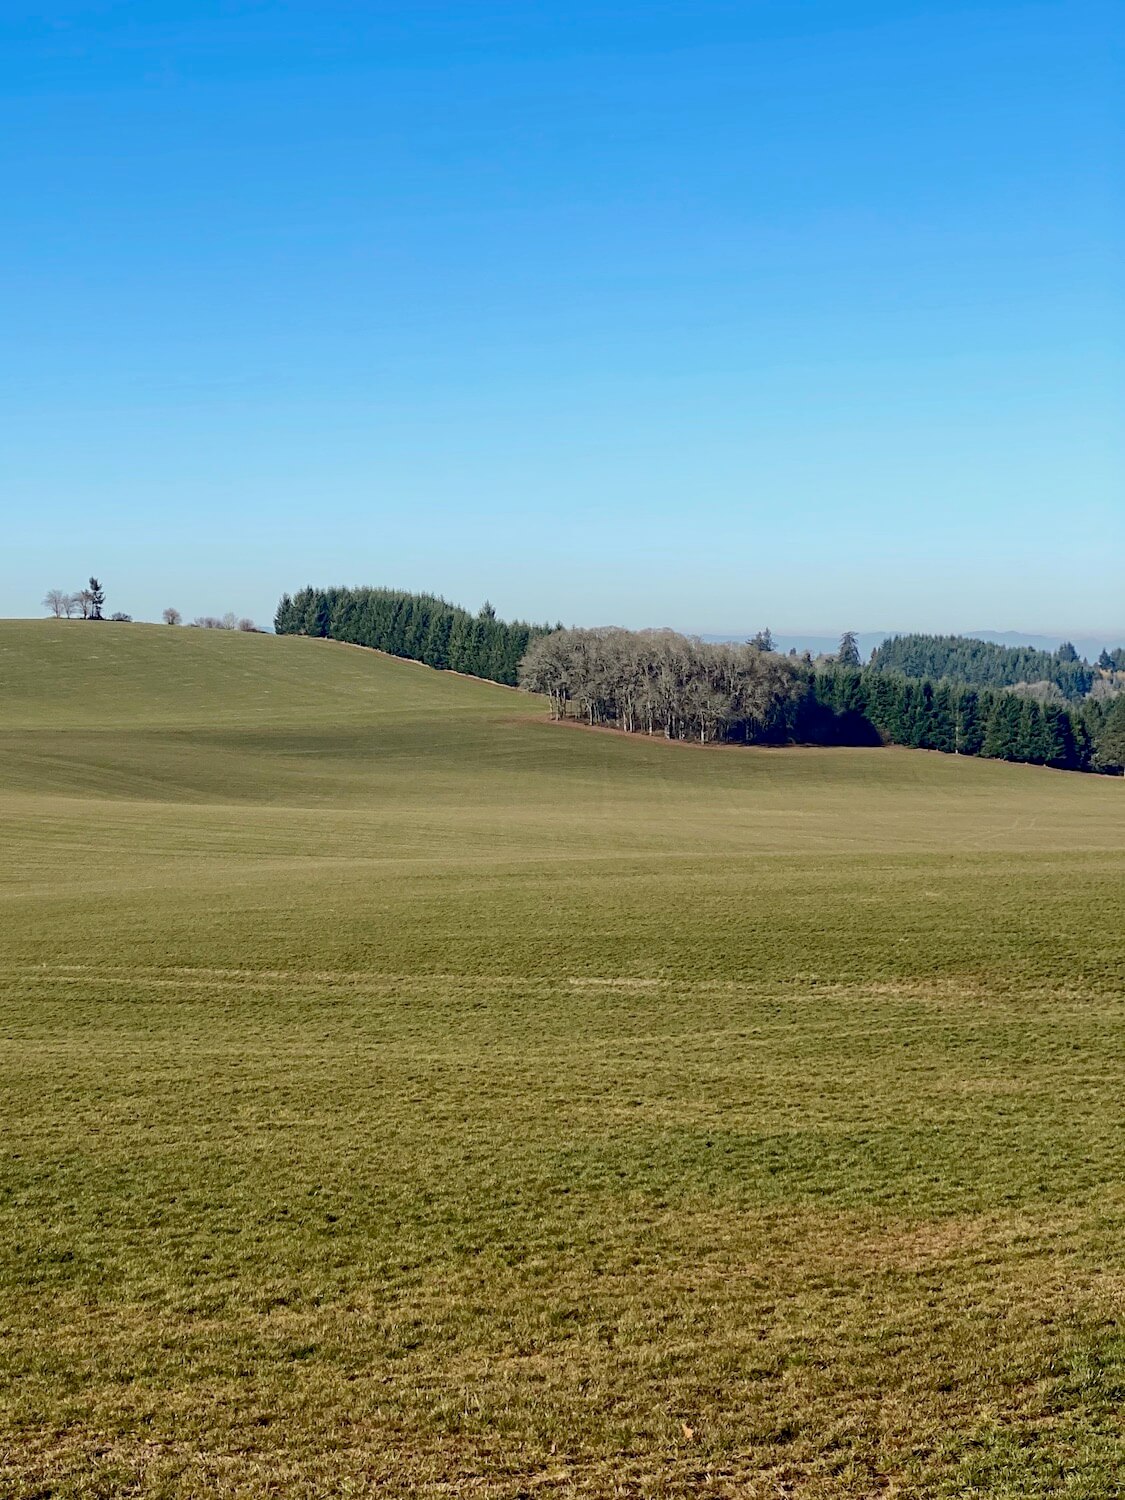 Rolling hills of Oregon's Willamette Valley are beautiful even in this Winter scene.  The field is a faded green color and tightly mowed down while the horizon features groves of bare oak trees against a fir tree forest.  The sky is blue in this Winter scene.  